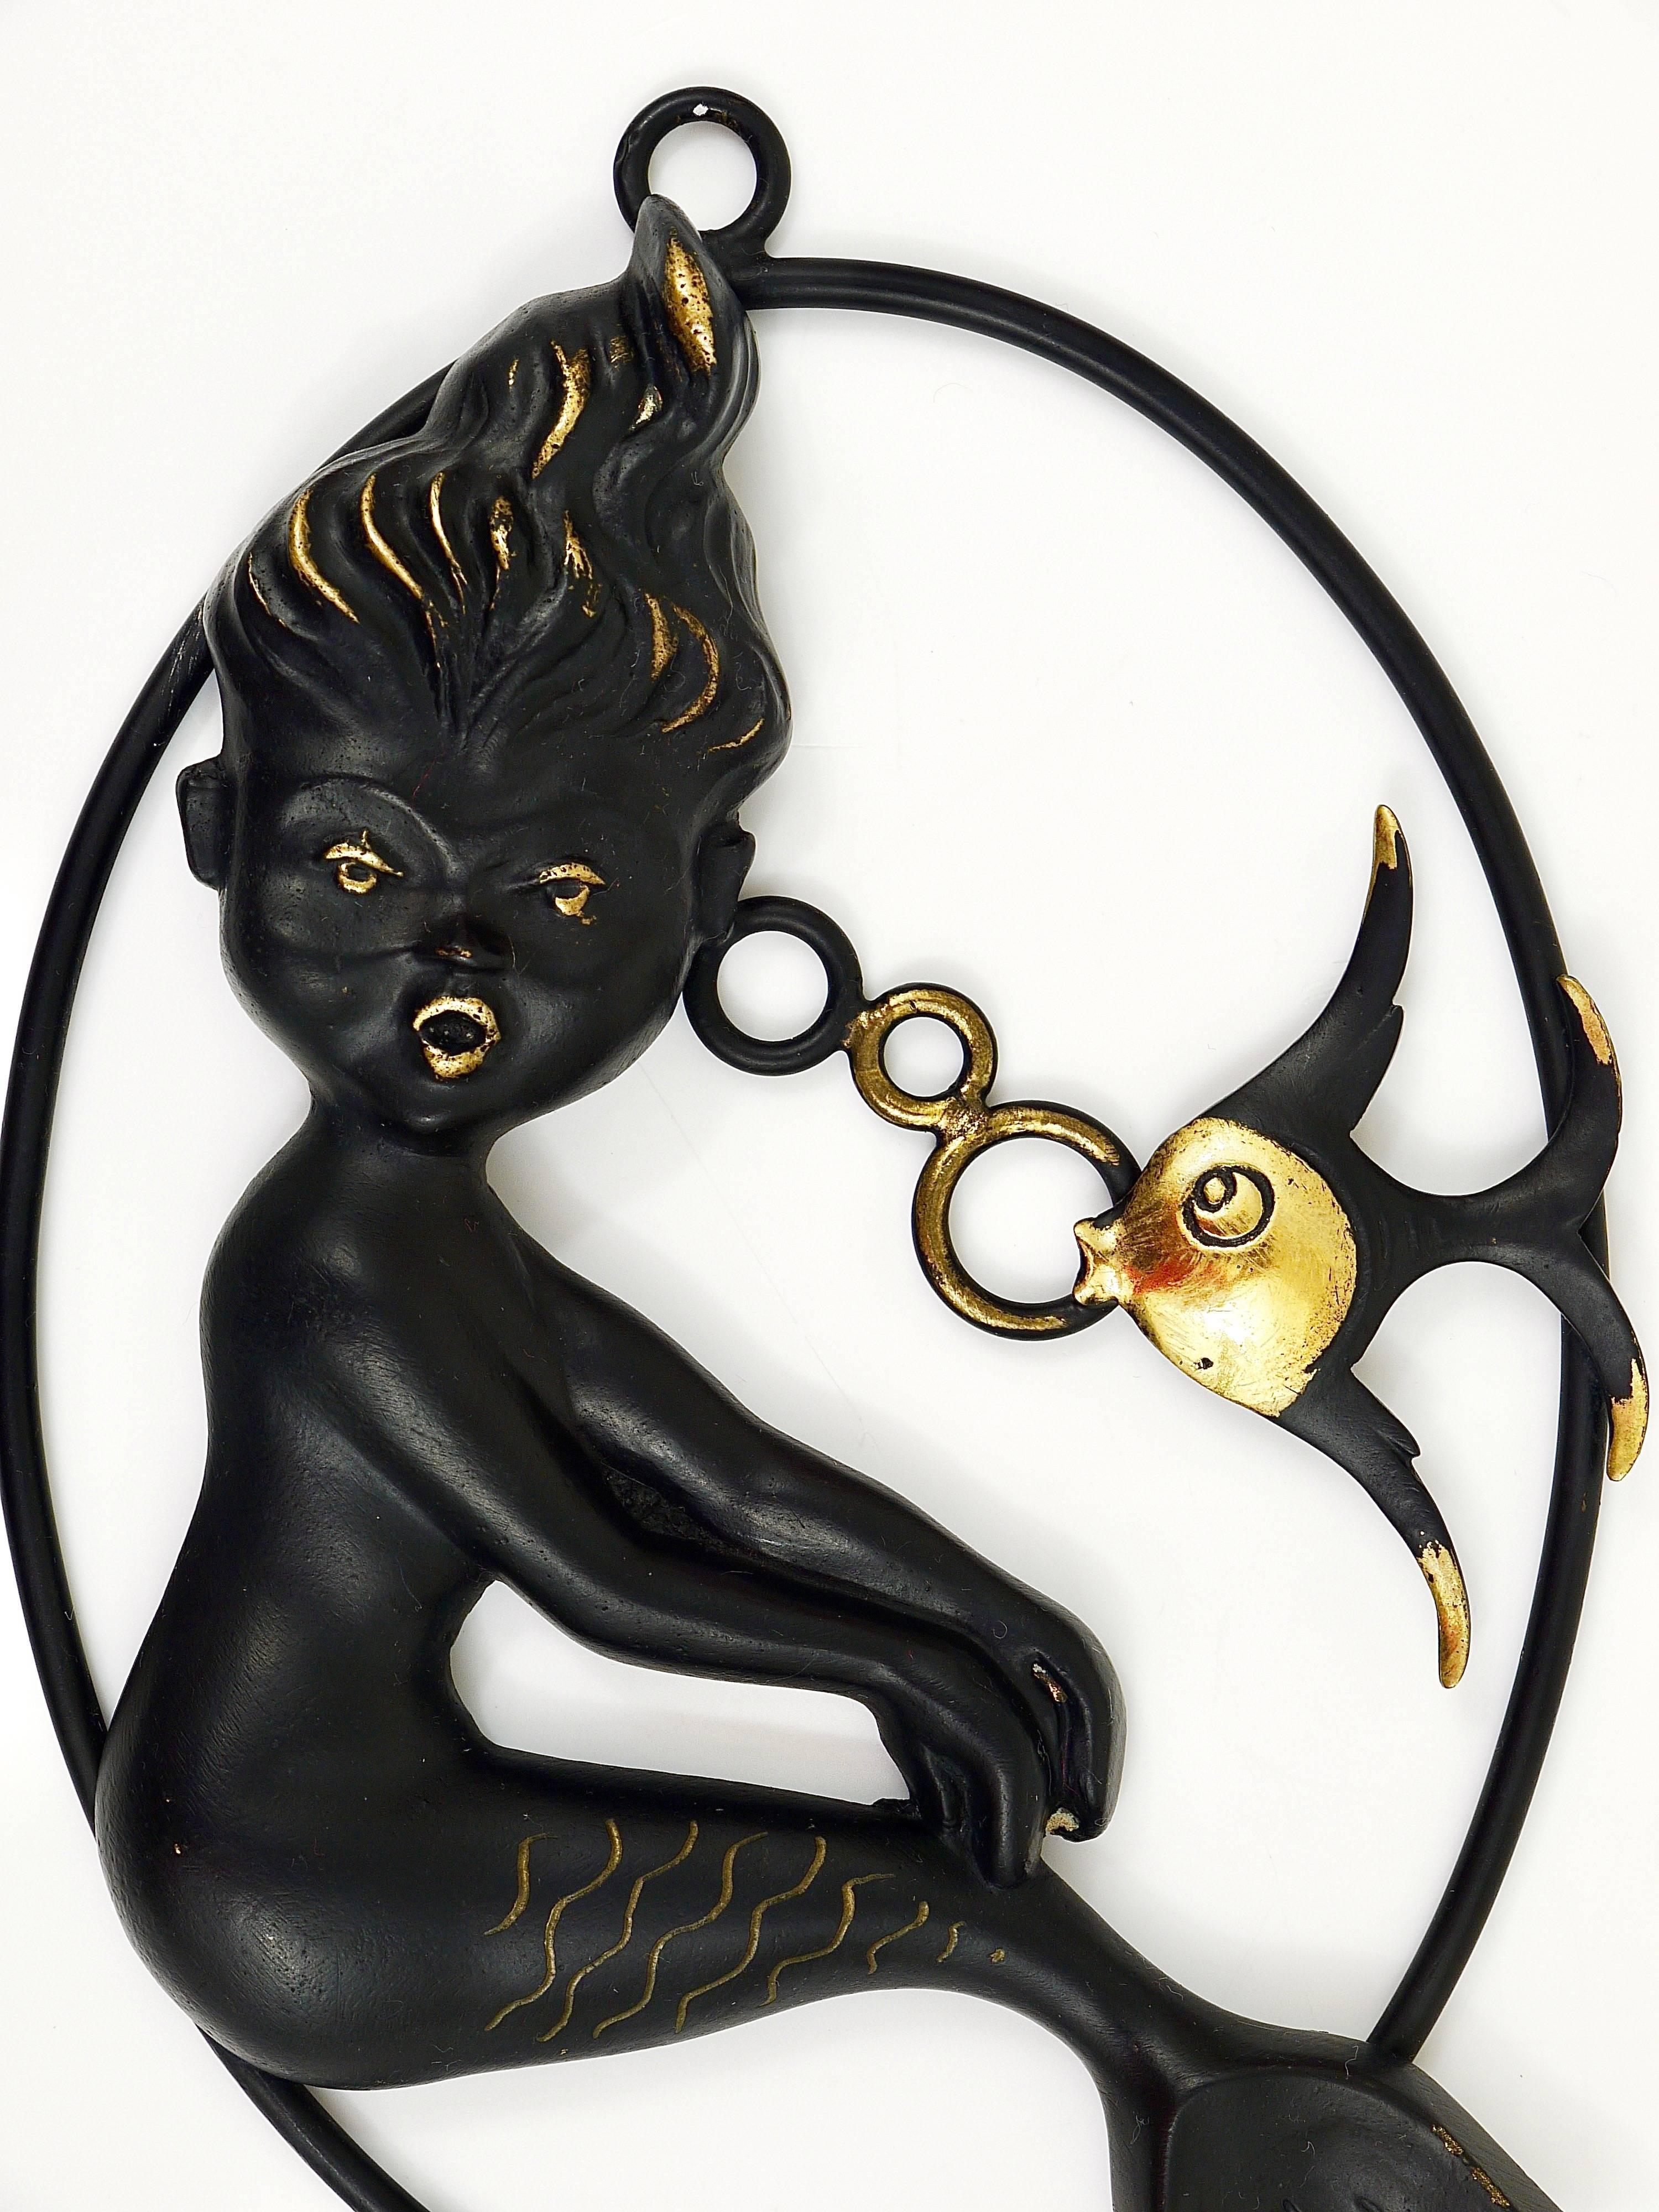 20th Century Walter Bosse Mermaid and Fish Wall Sculpture by Herta Baller, Austria, 1950s For Sale